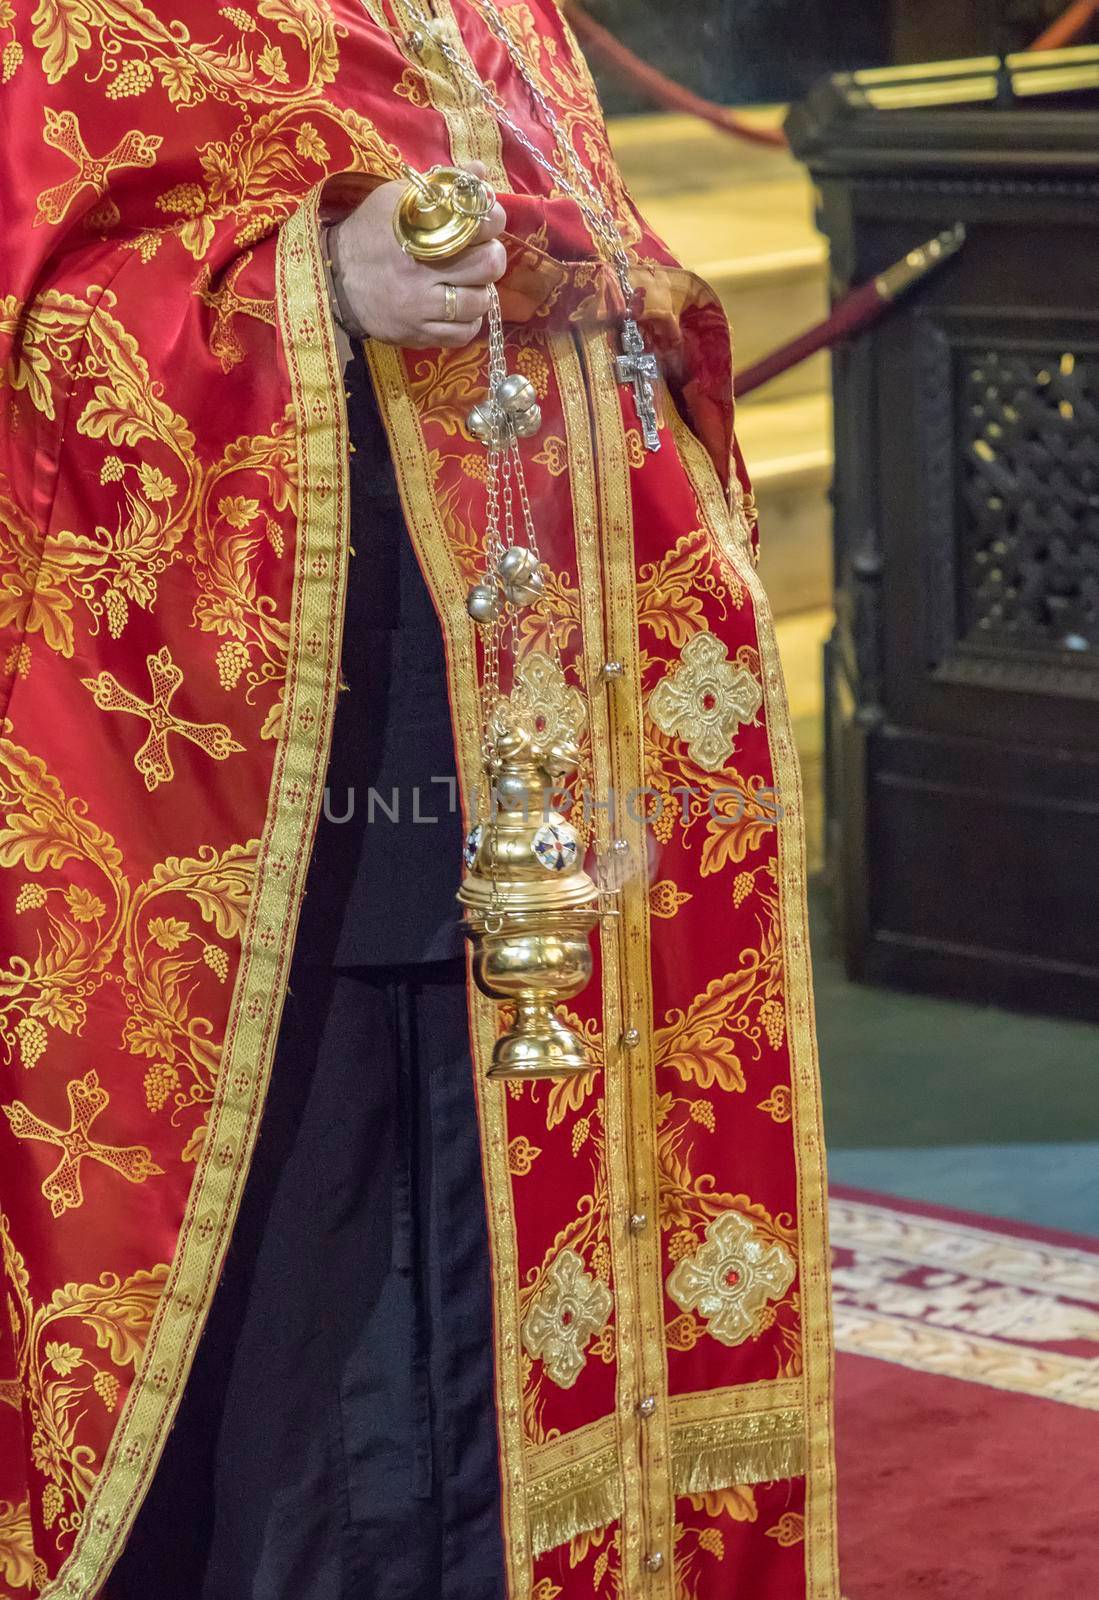 The priest holding the censer with incense in the Orthodox Christian Church